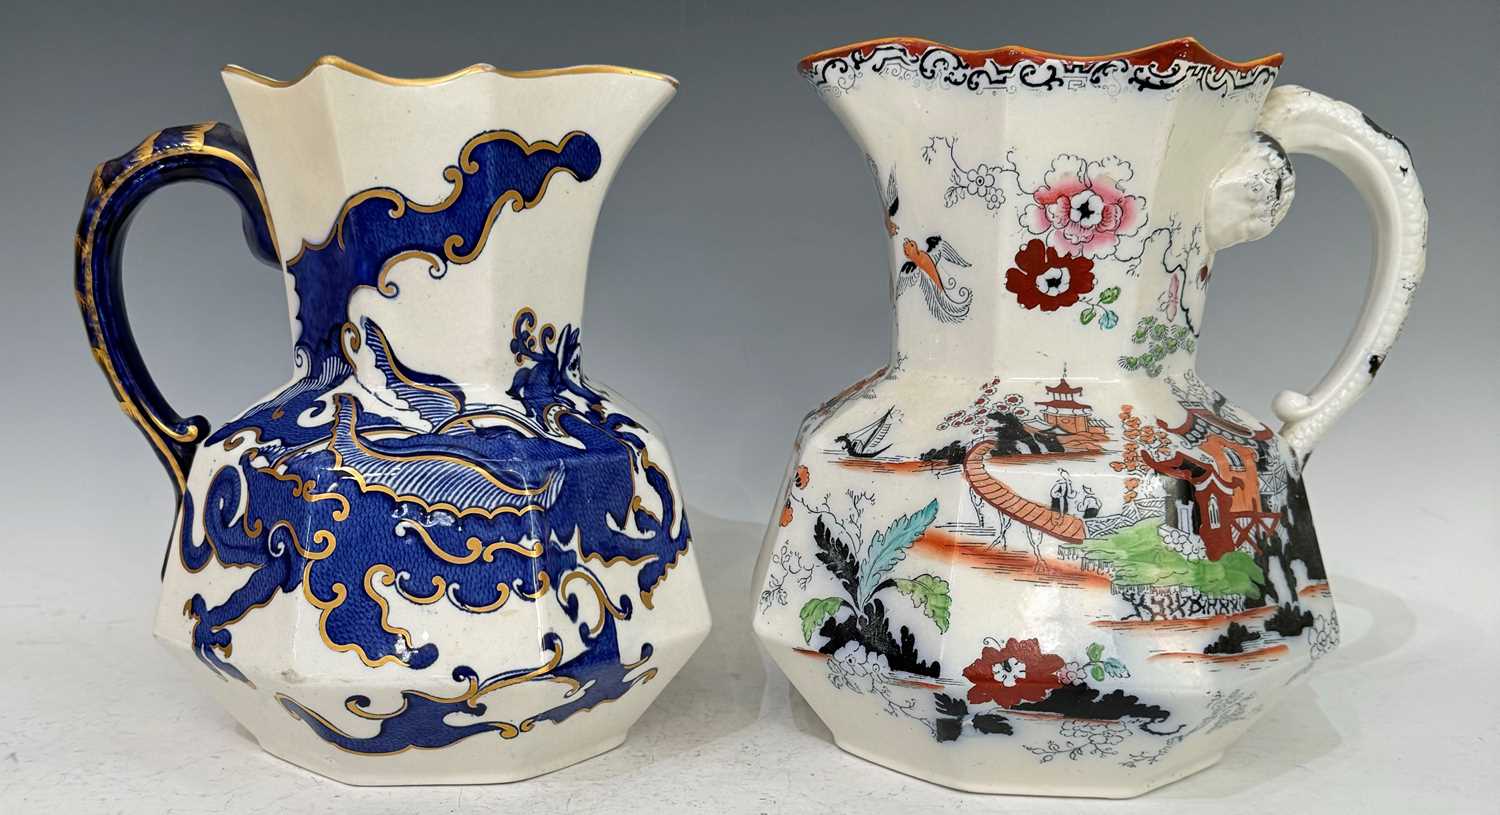 Two antique Masons ironstone china hydra jugs / pitchers, the first in the 'Pagoda' pattern,